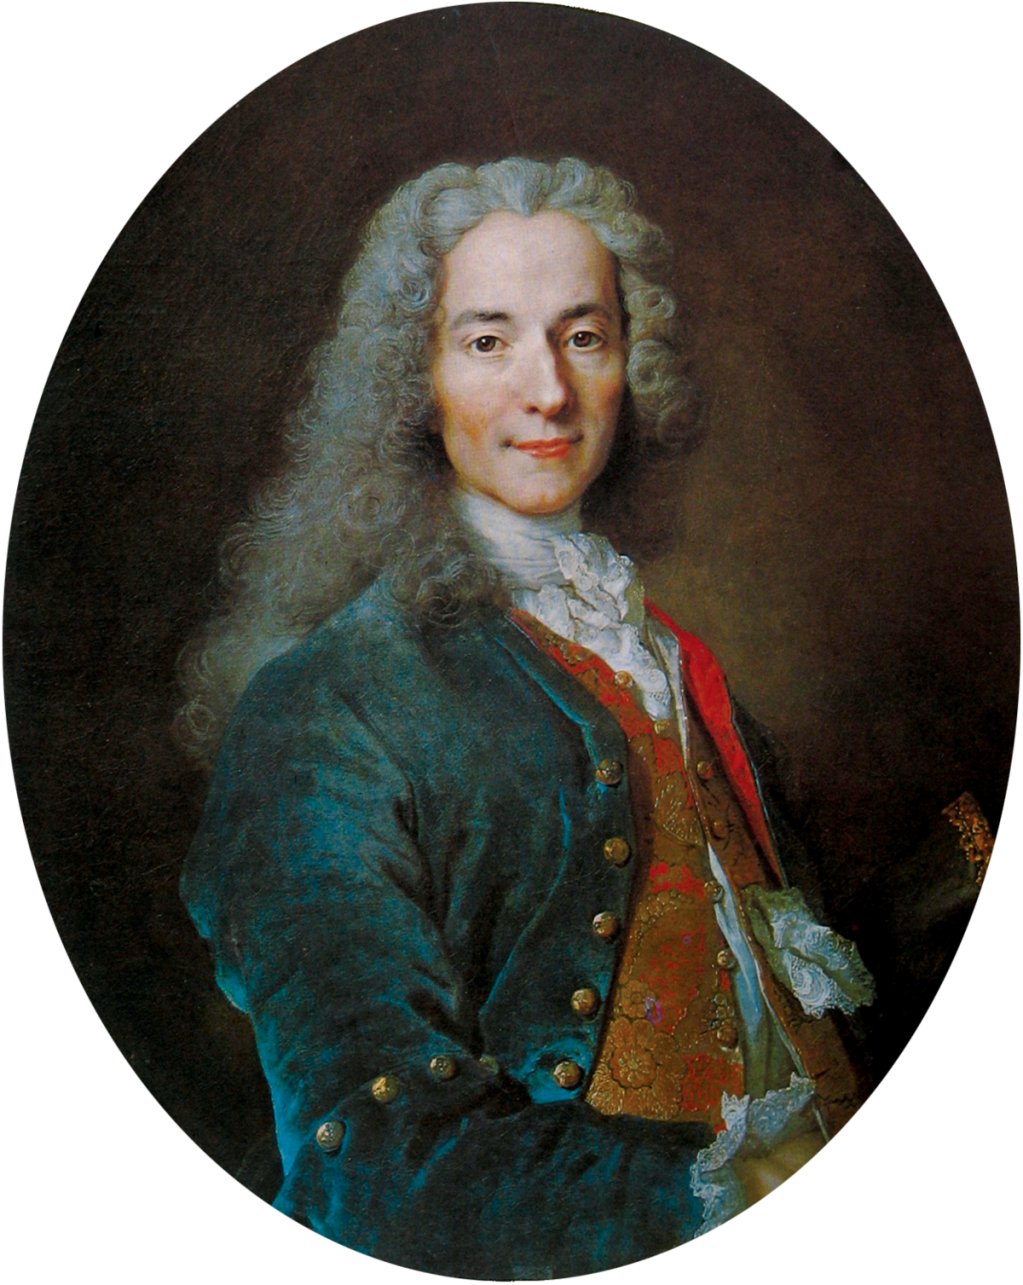 Voltaire – A Man For Our Times